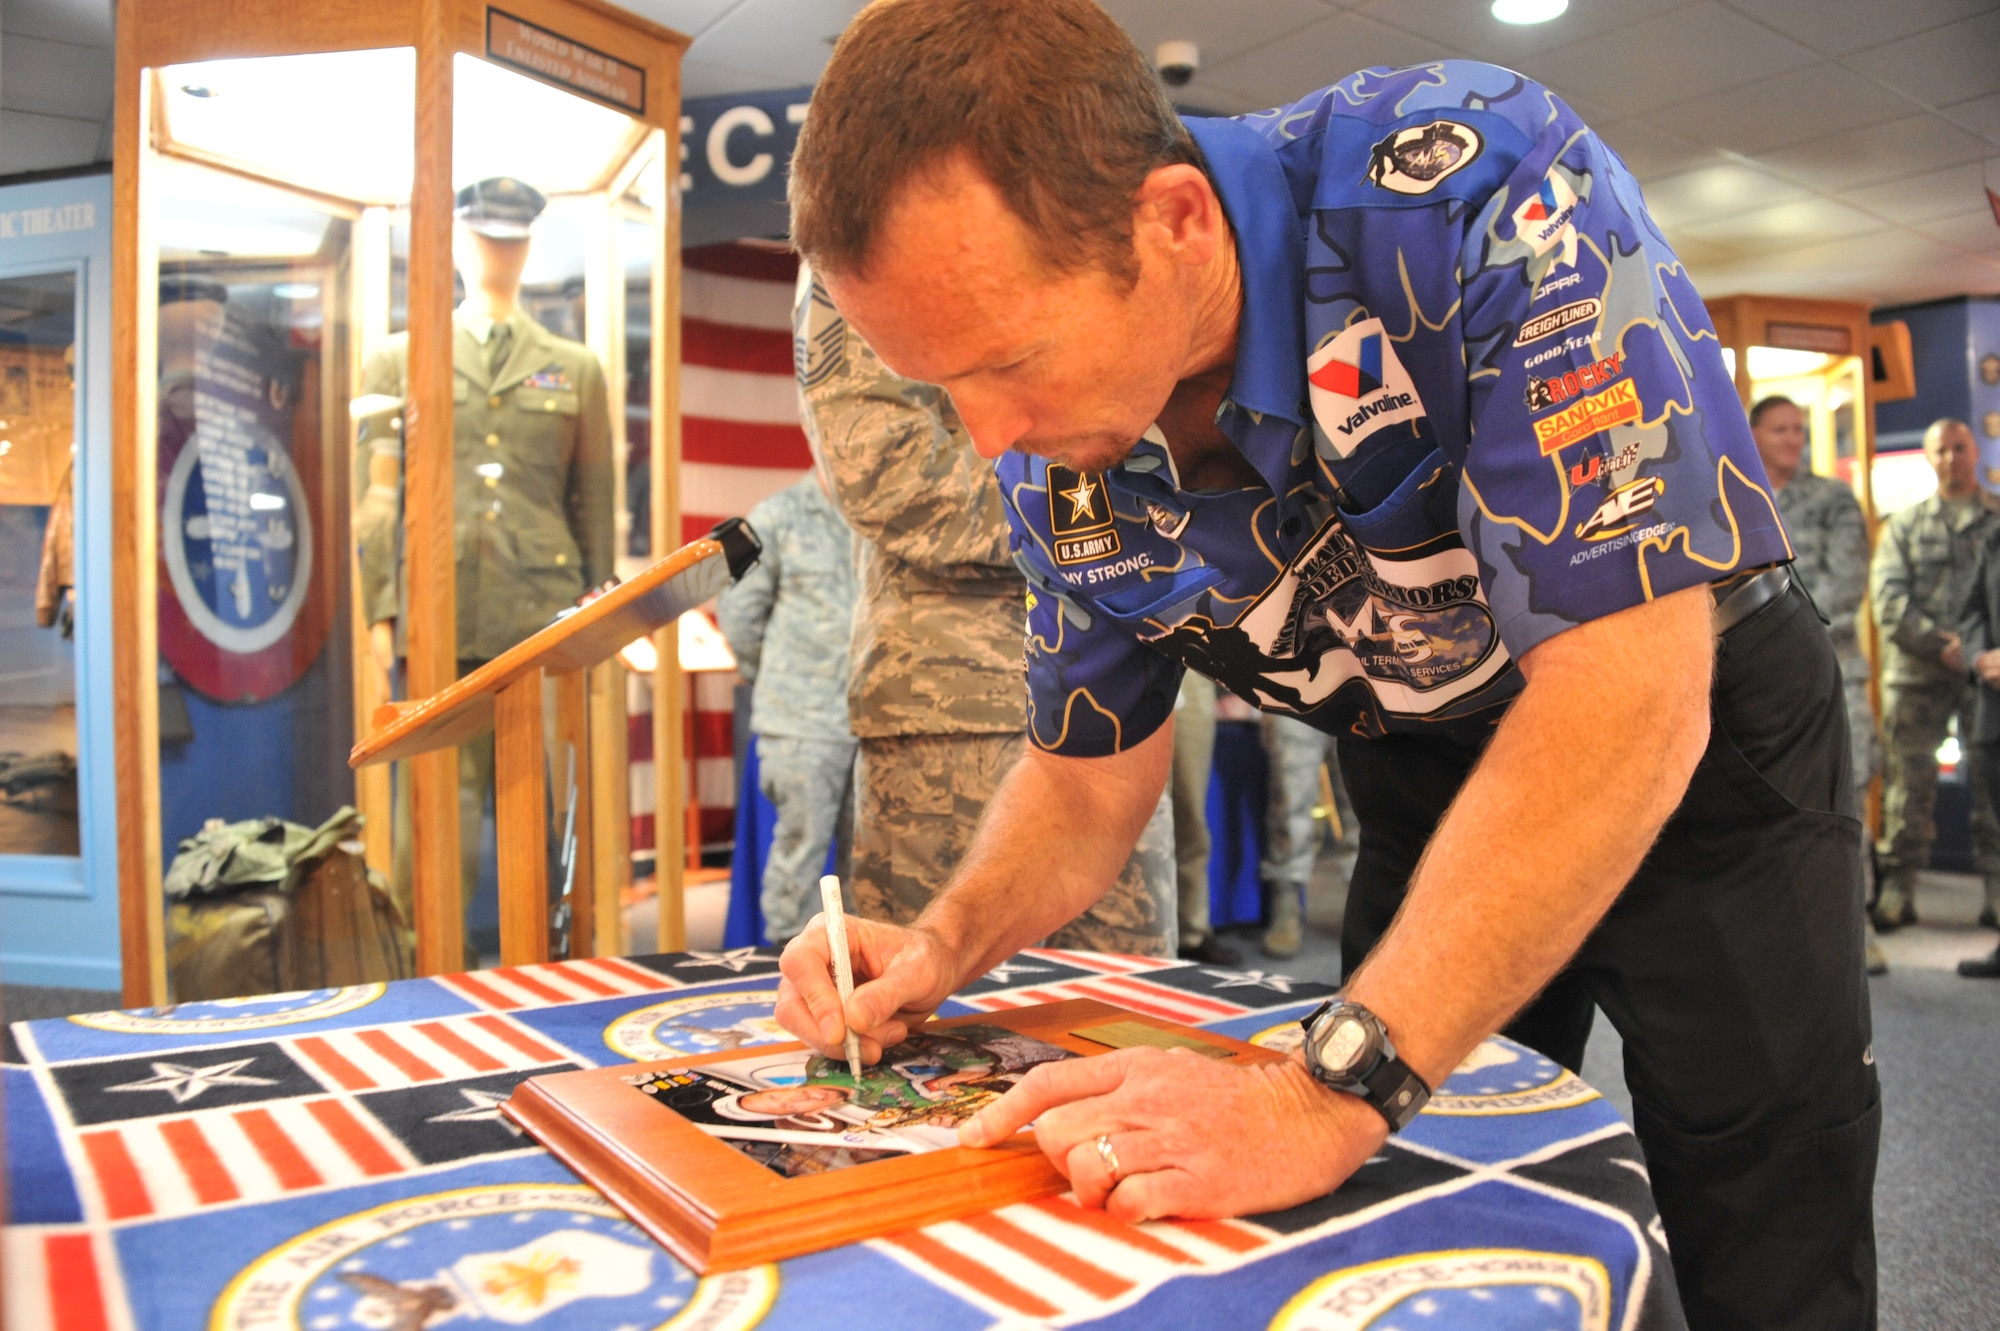 National Hot Rod Association Funny Car champion Jack Beckman signs his photo, after being added to the U.S. Air Force Enlisted Heritage Hall’s Wall of Achievers May 2 at Gunter Annex. The Wall of Achievers pays tribute to former enlisted Airmen who have contributed to the growth and development of the Air Force. (U.S. Air Force photo by Staff Sgt. Sandi Percival)